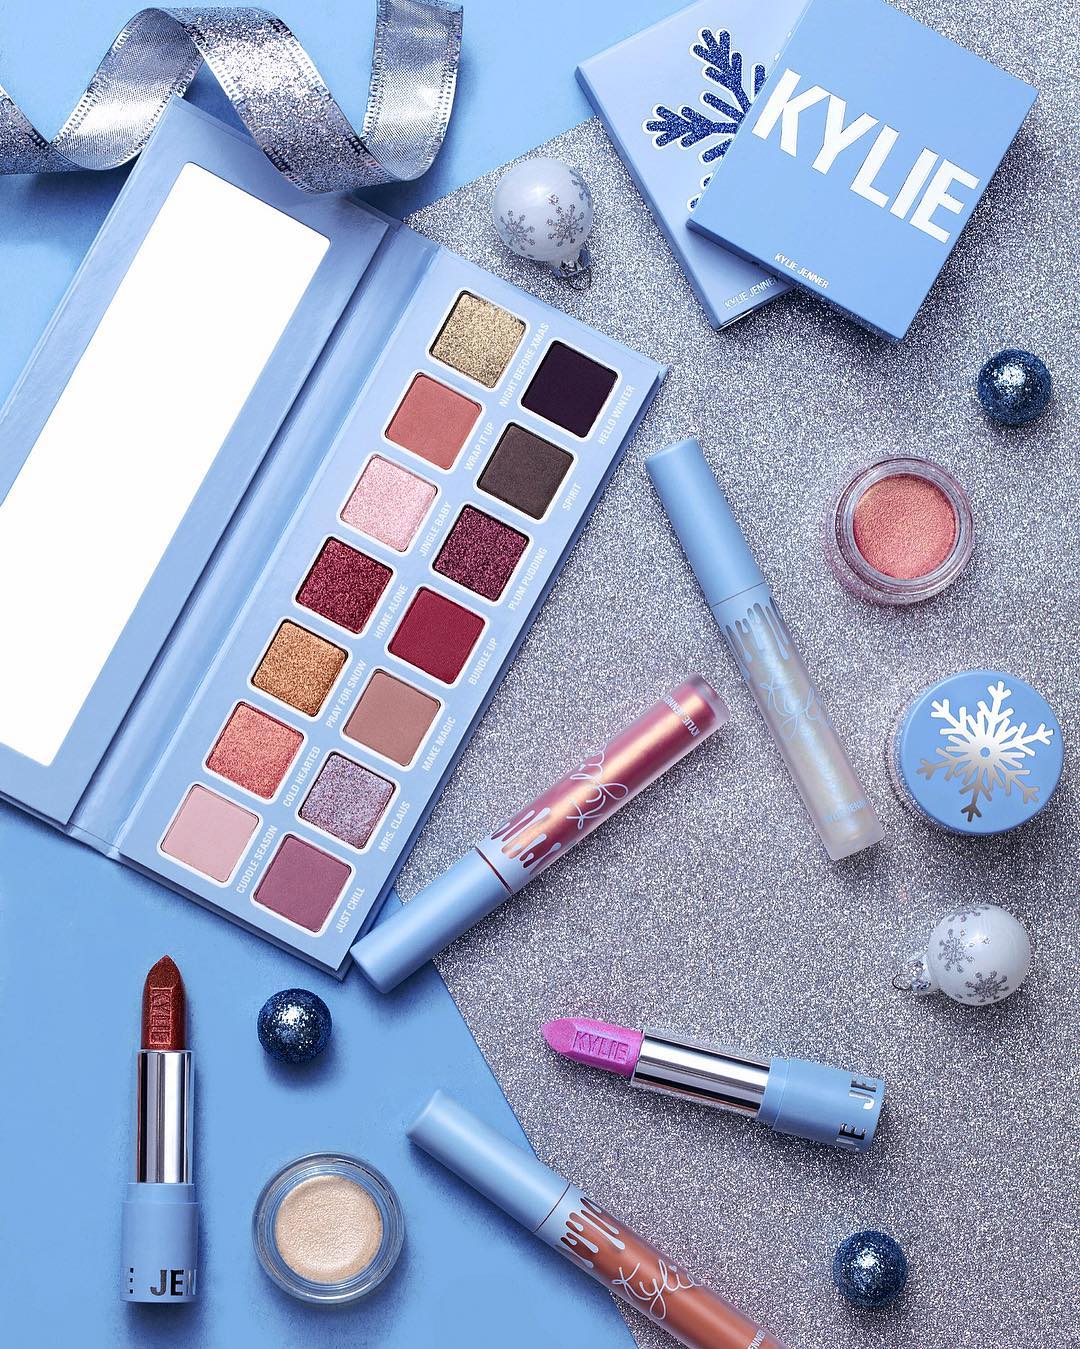 Kylie Cosmetics Reveals Icy Blue Holiday 2018 Collection